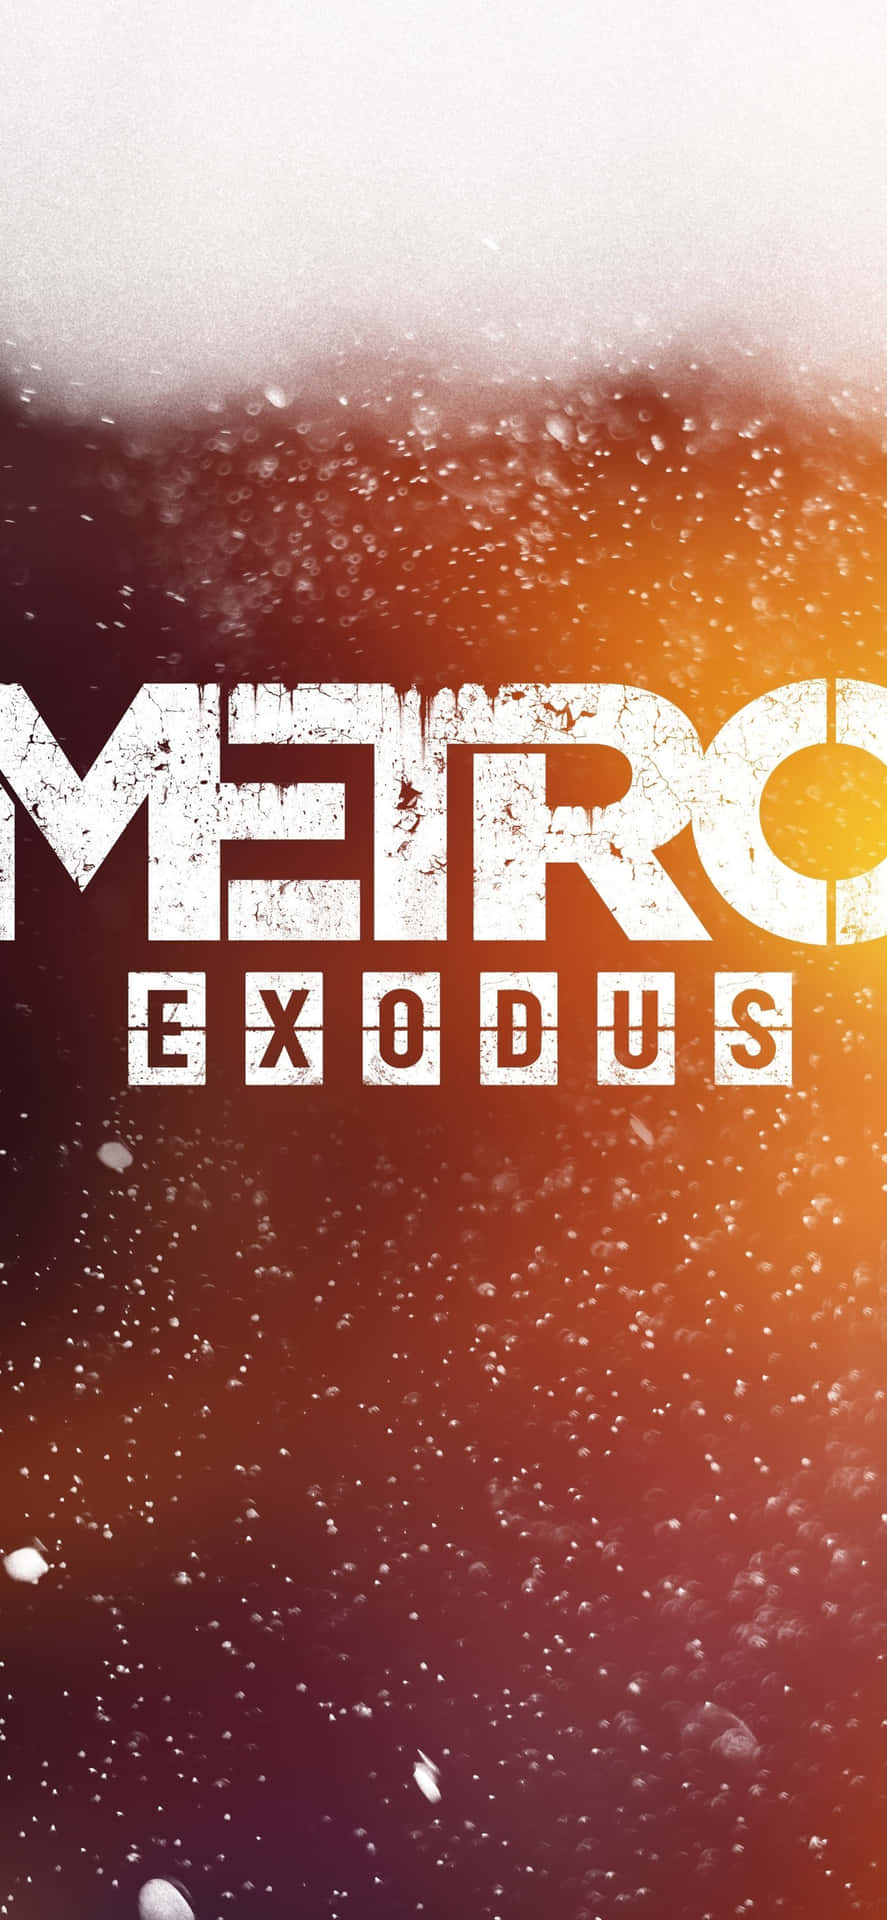 Get Lost In The Post-Apocalyptic World Of Metro Exodus On Your Iphone X